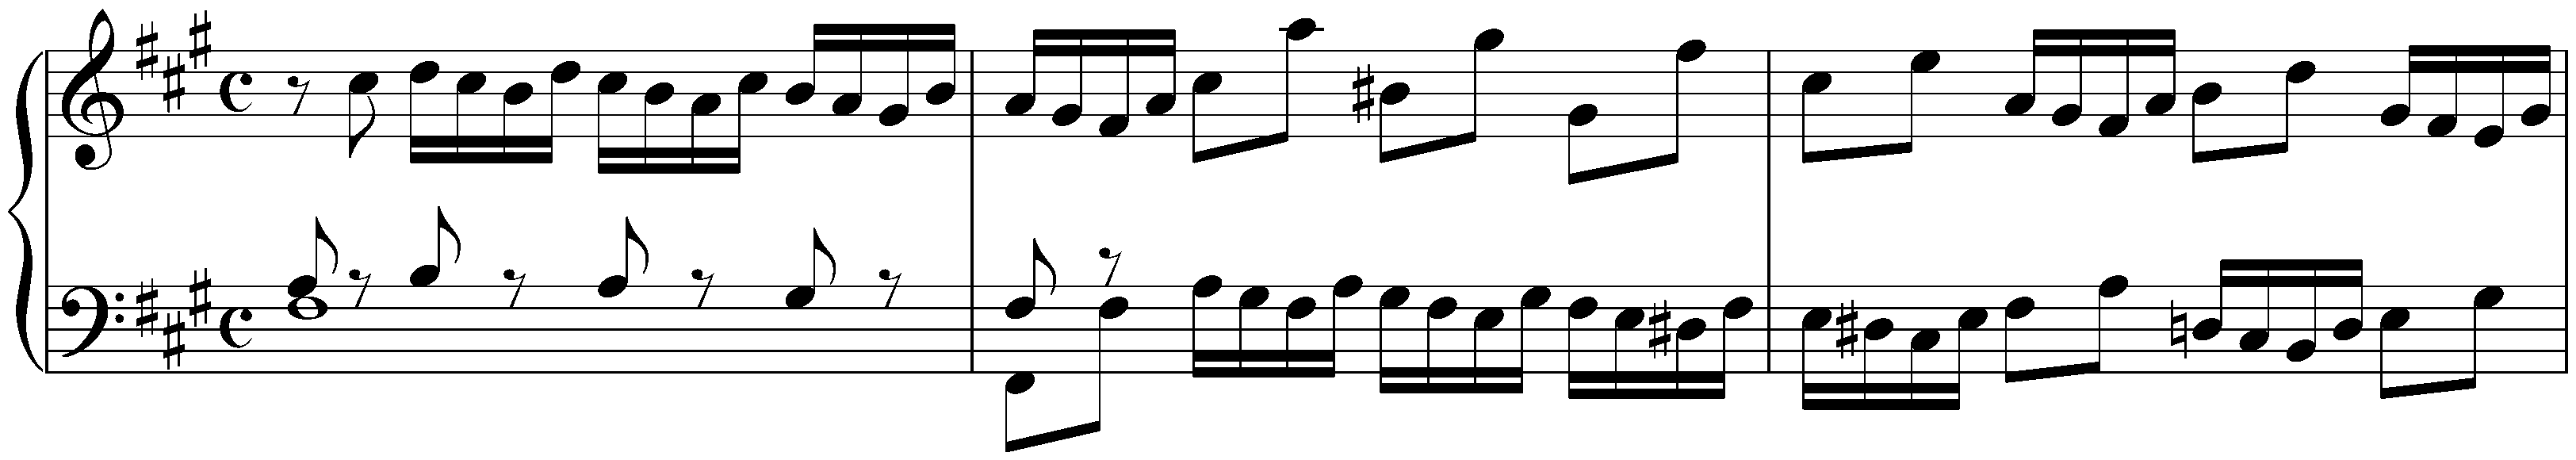 The Well-Tempered Clavier, Book 1, BWV 846–869; 14. F-sharp minor, BWV 859, Prelude